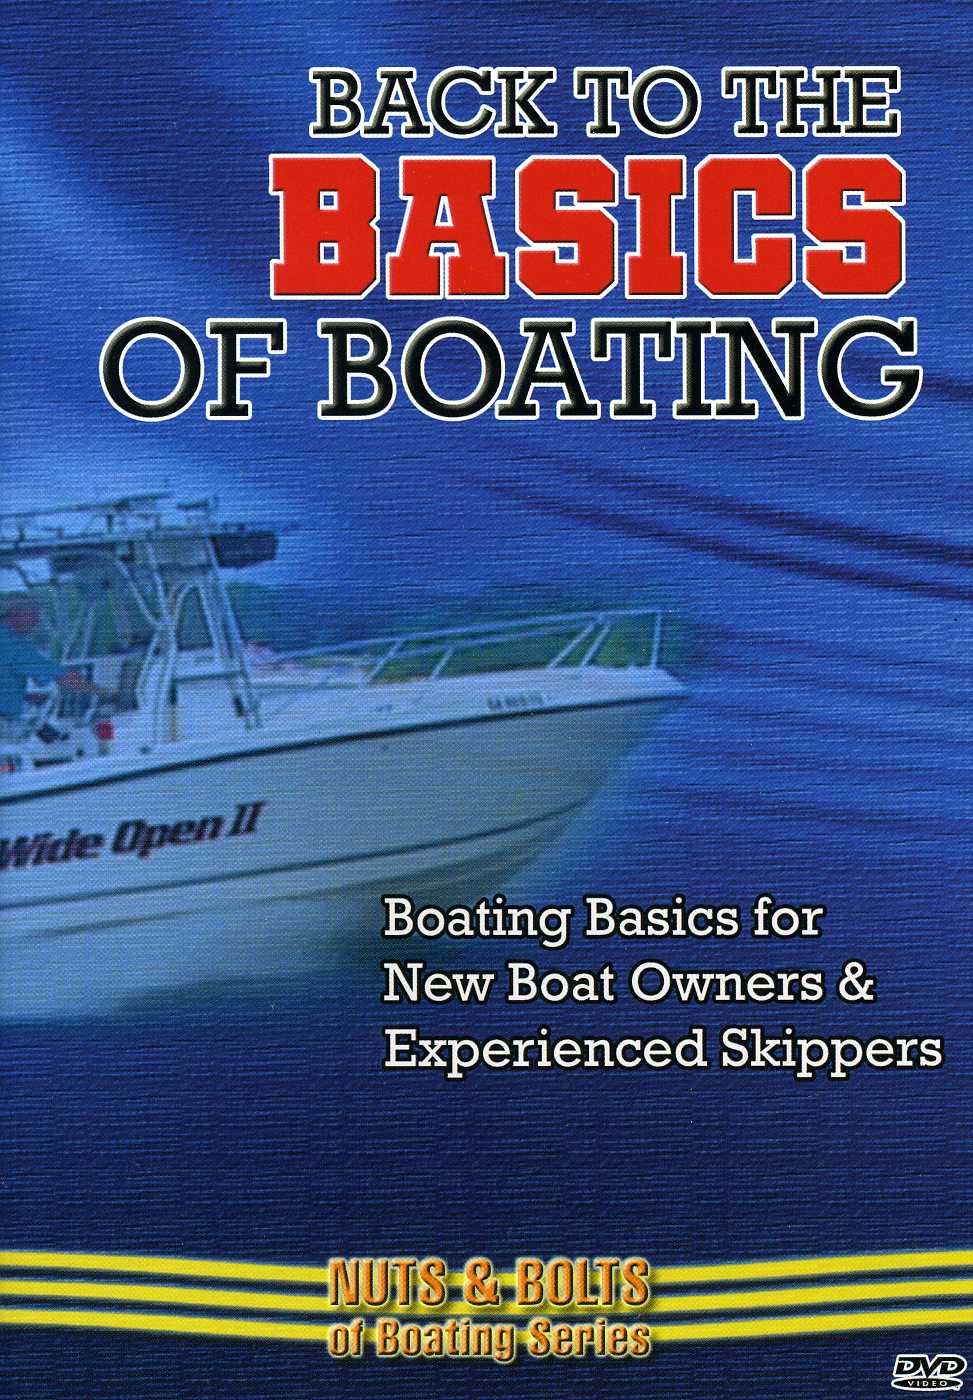 BOATING BASICS FOR NEW BOAT OWNERS: BACK TO THE